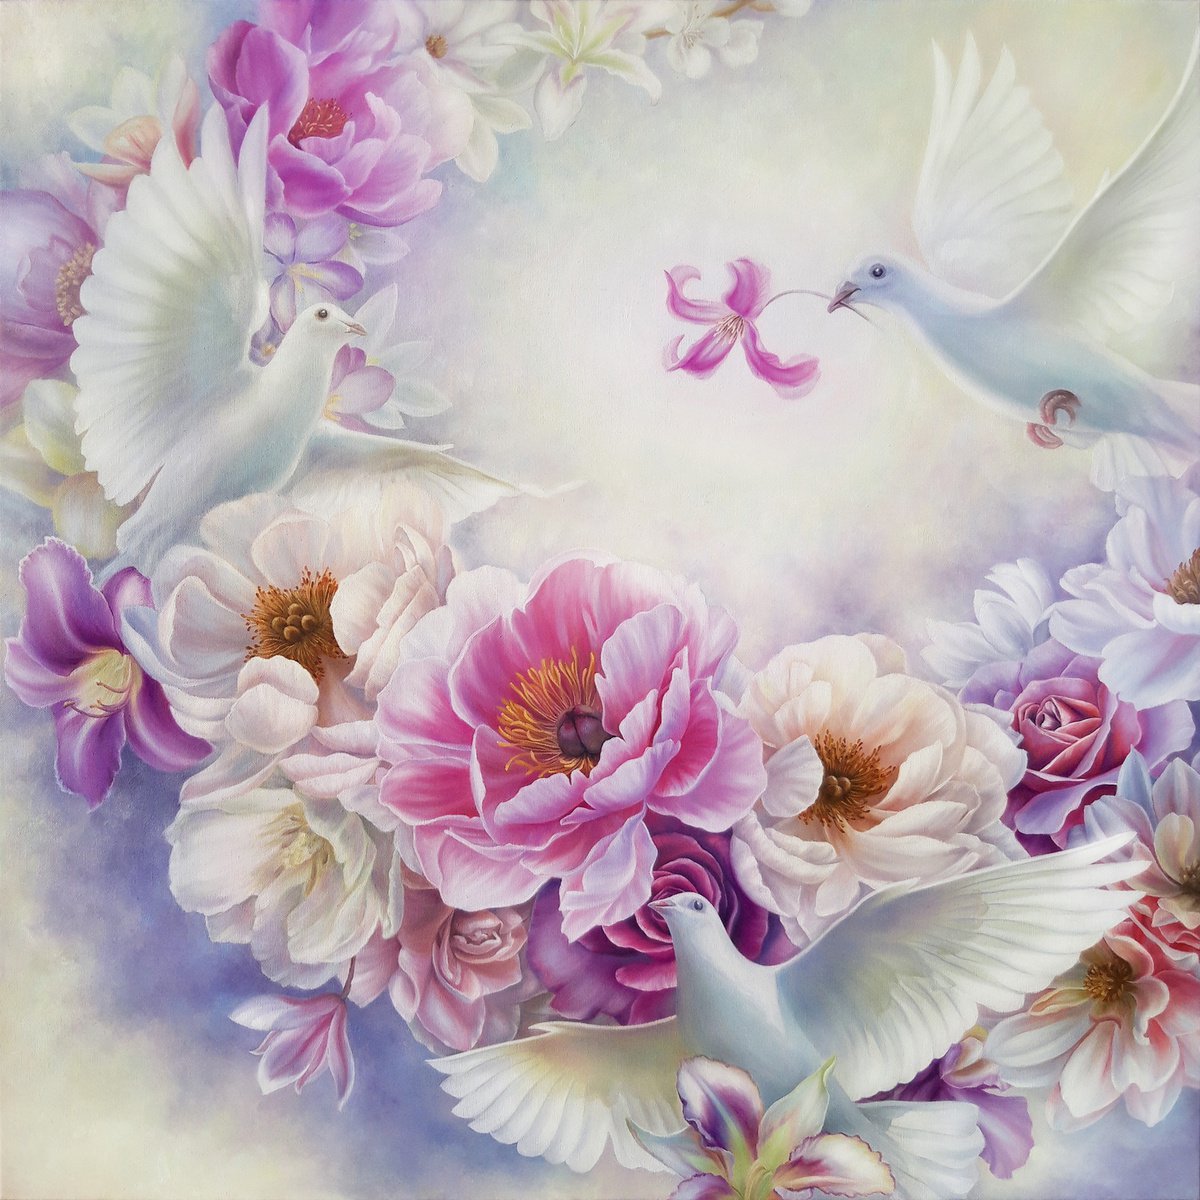 Floral dance, flowers with birds by Anna Steshenko